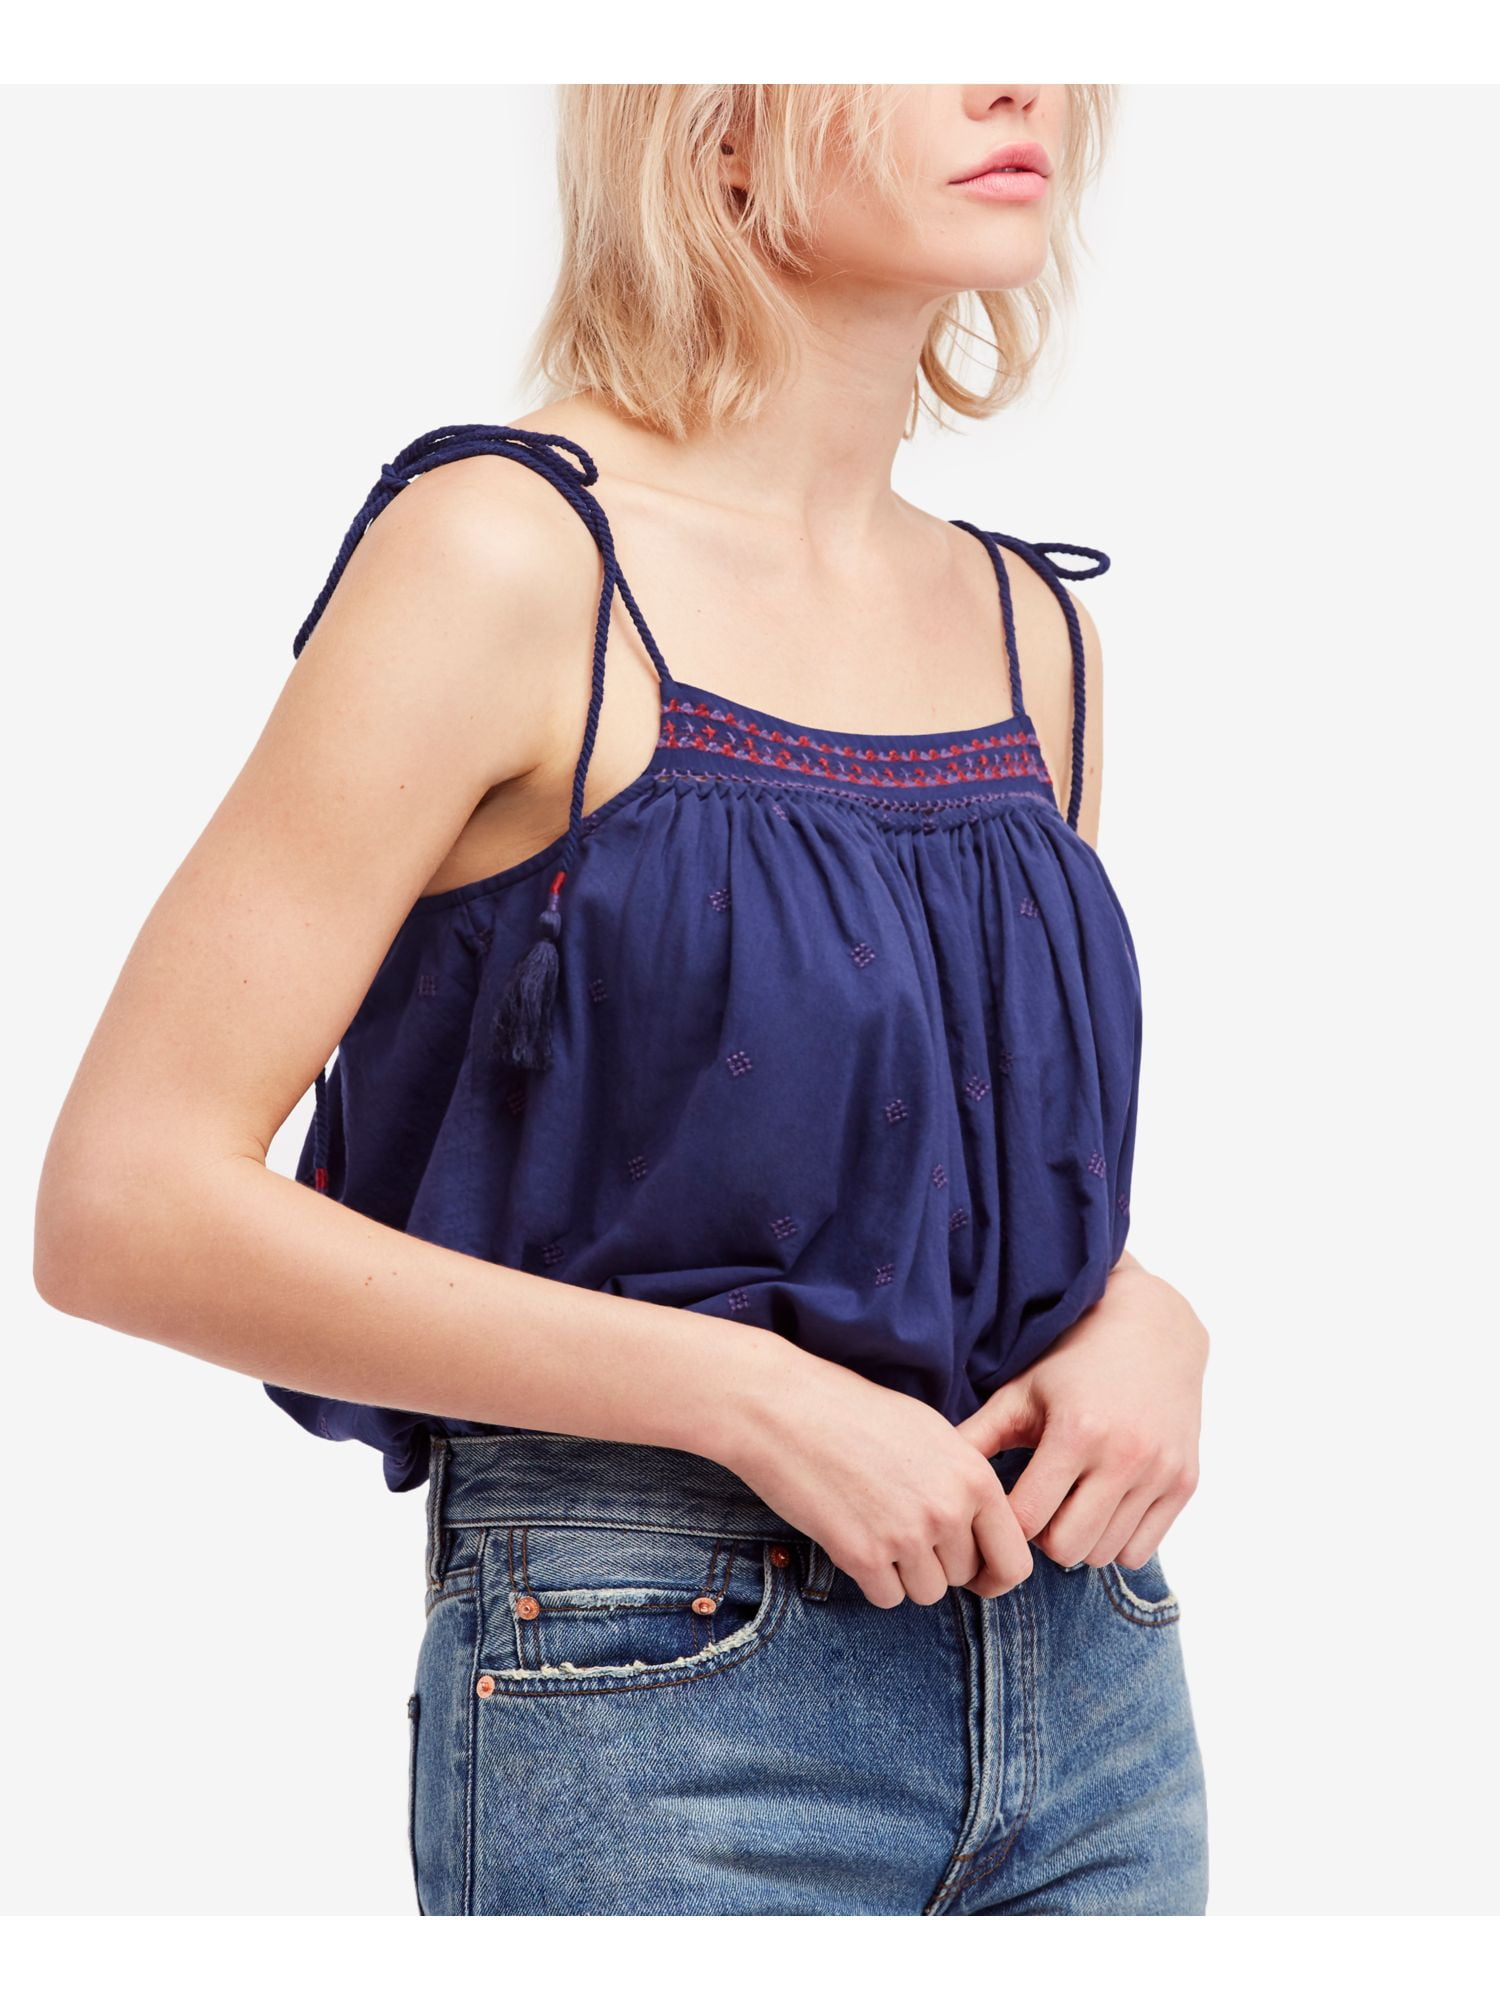 FREE PEOPLE Womens Navy Embroidered Cami Sleeveless Top S 